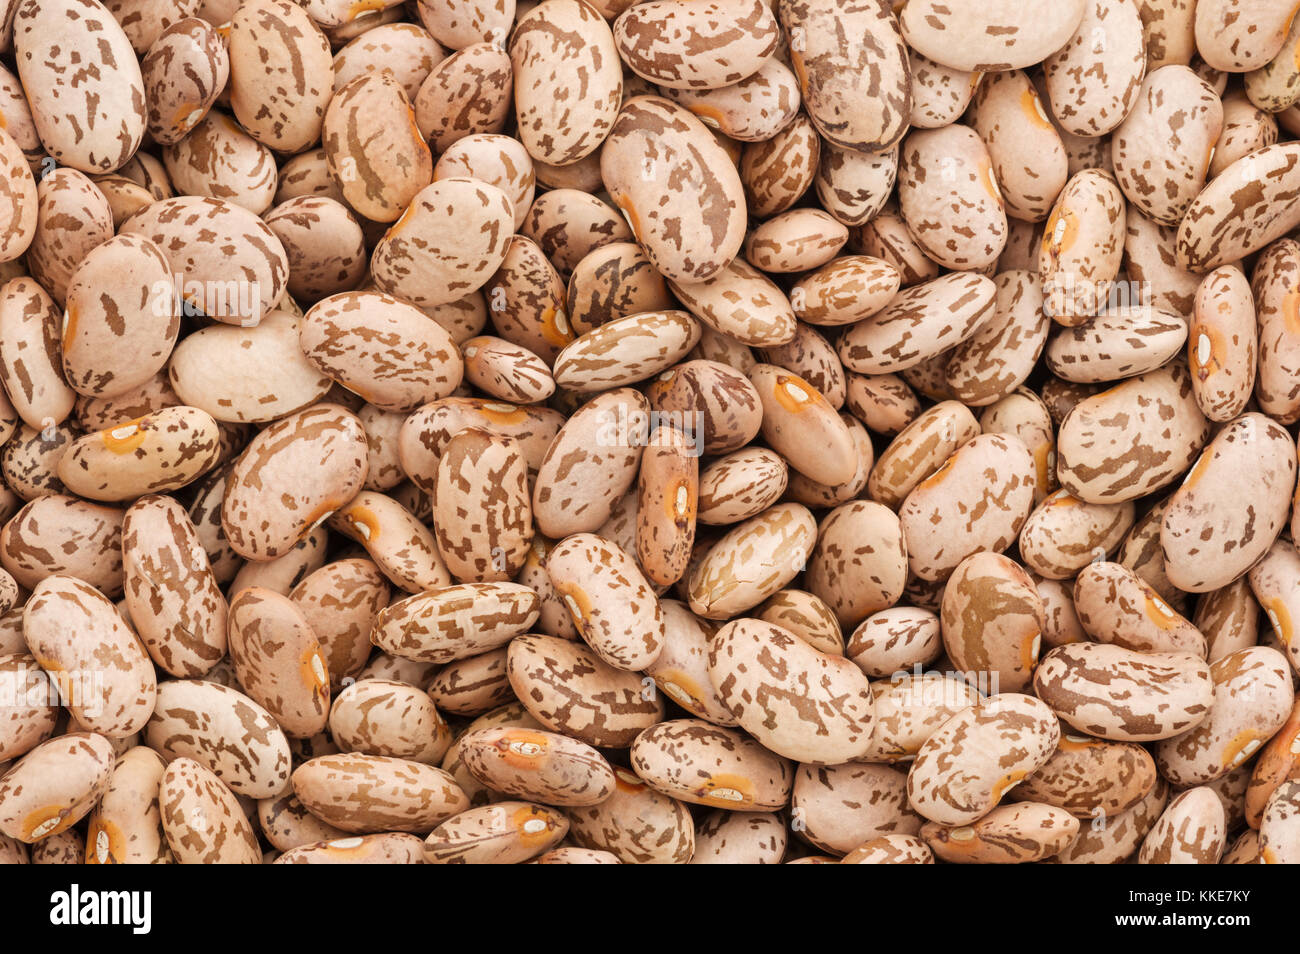 dry uncooked pinto beans close up background image Stock Photo